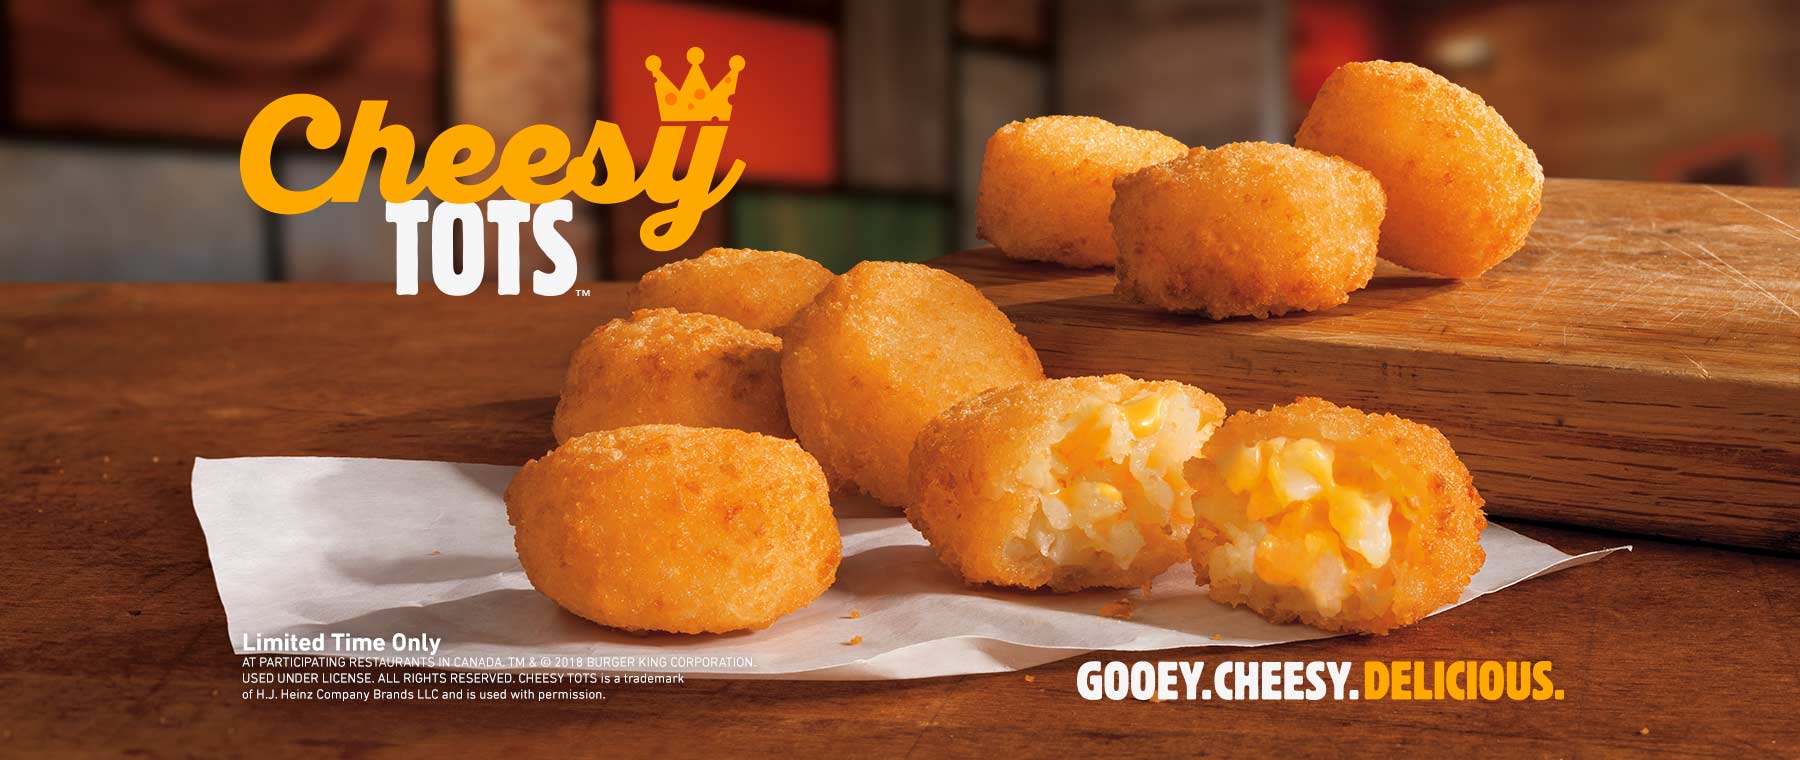 chessy tots